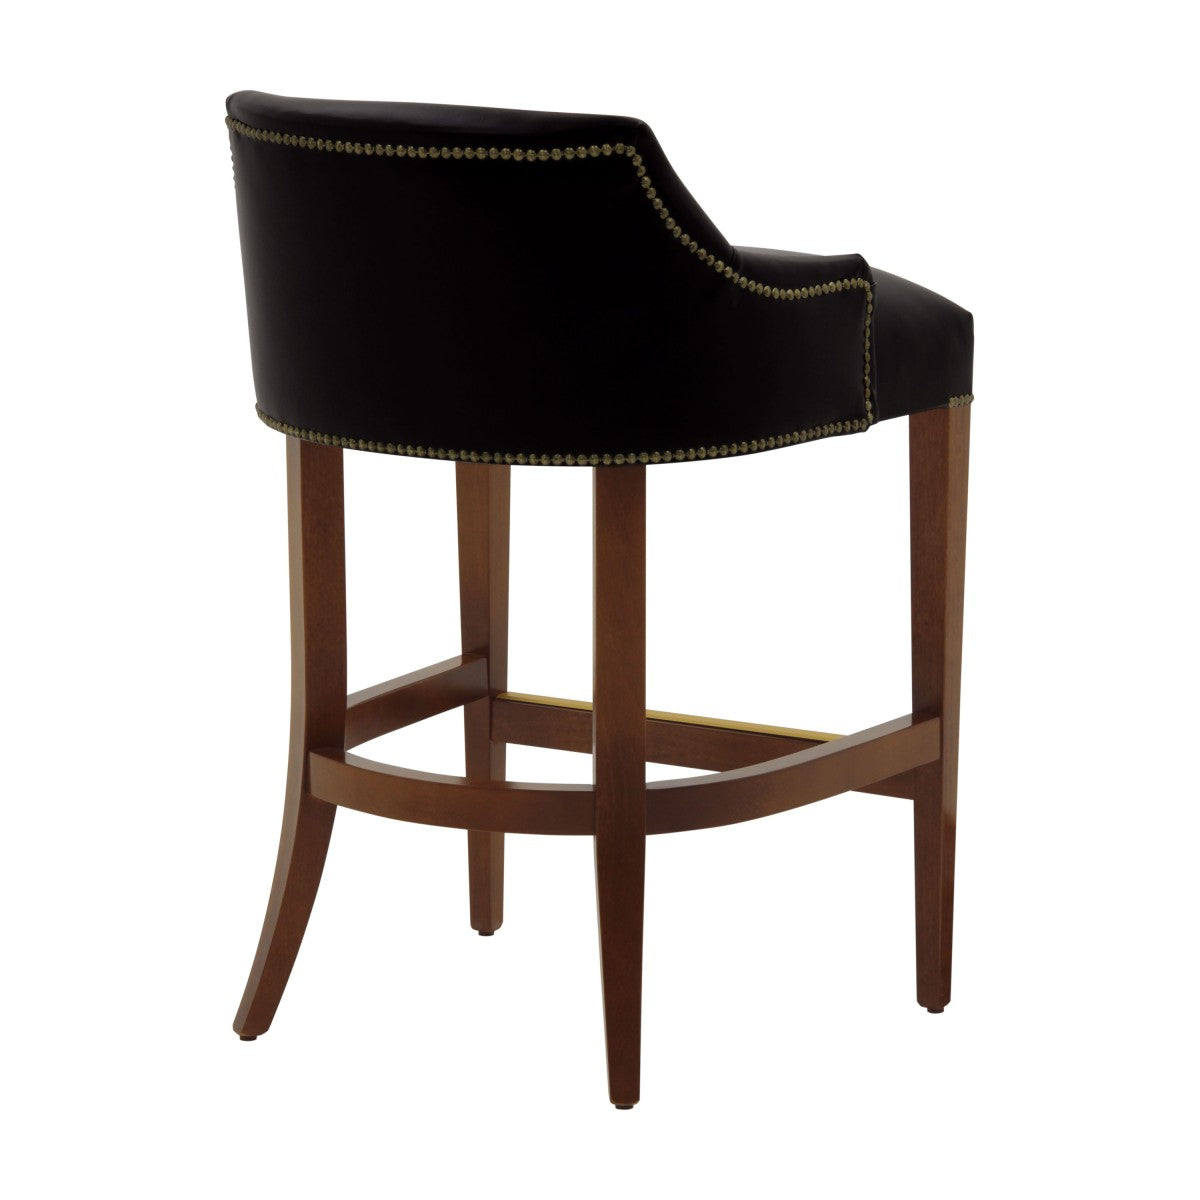 Arturo Bespoke Upholstered Contemporary Kitchen Counter Barstool MS460C Custom Made To Order